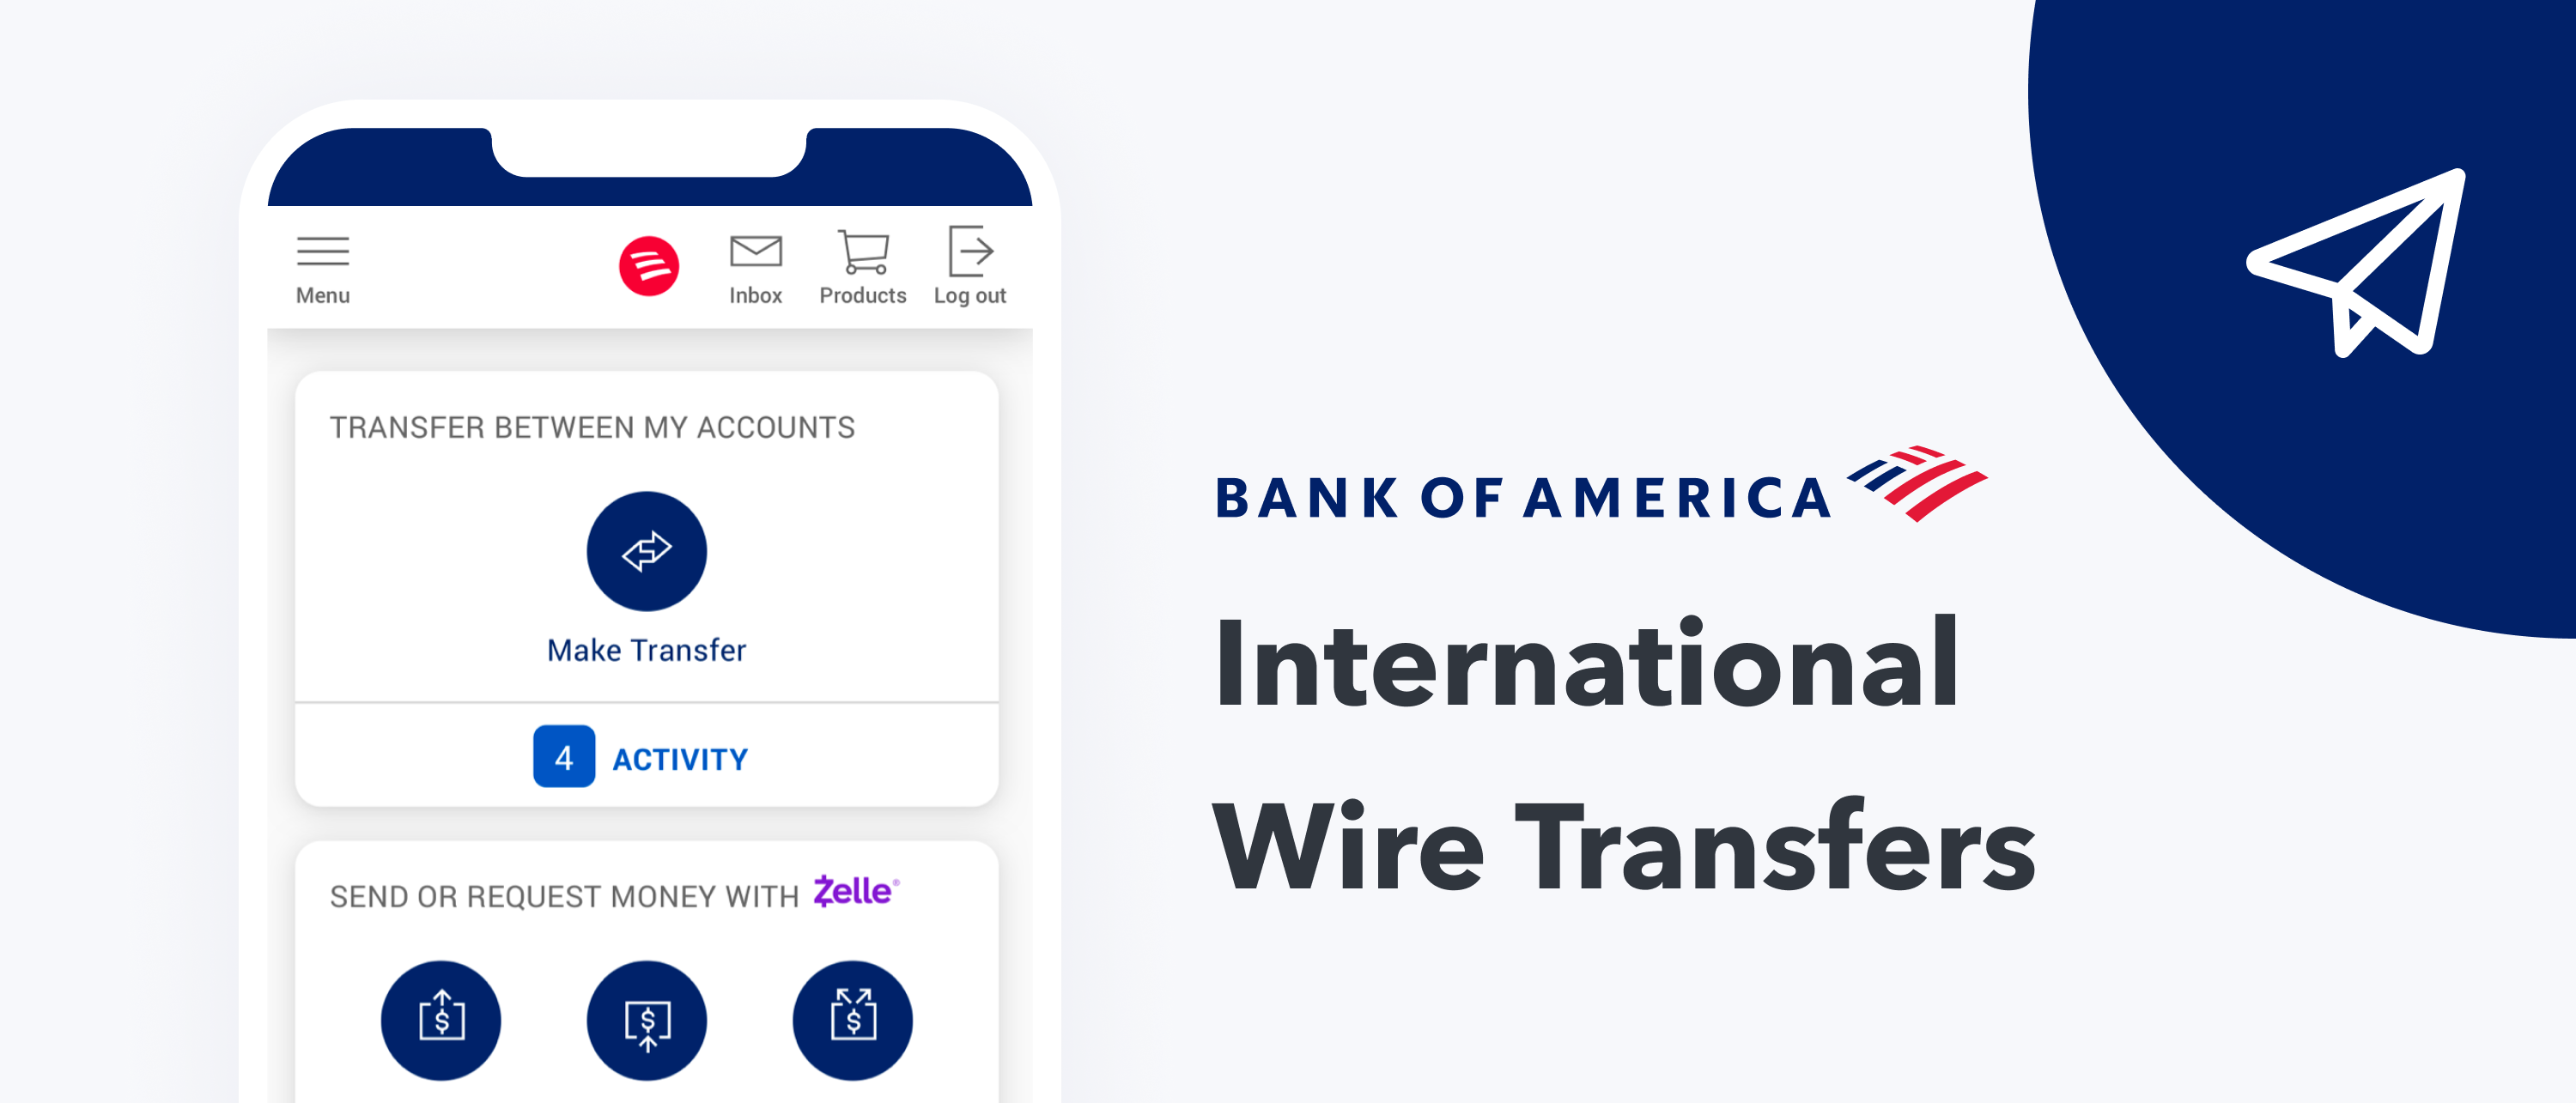 bank of america wire transfer fee waived